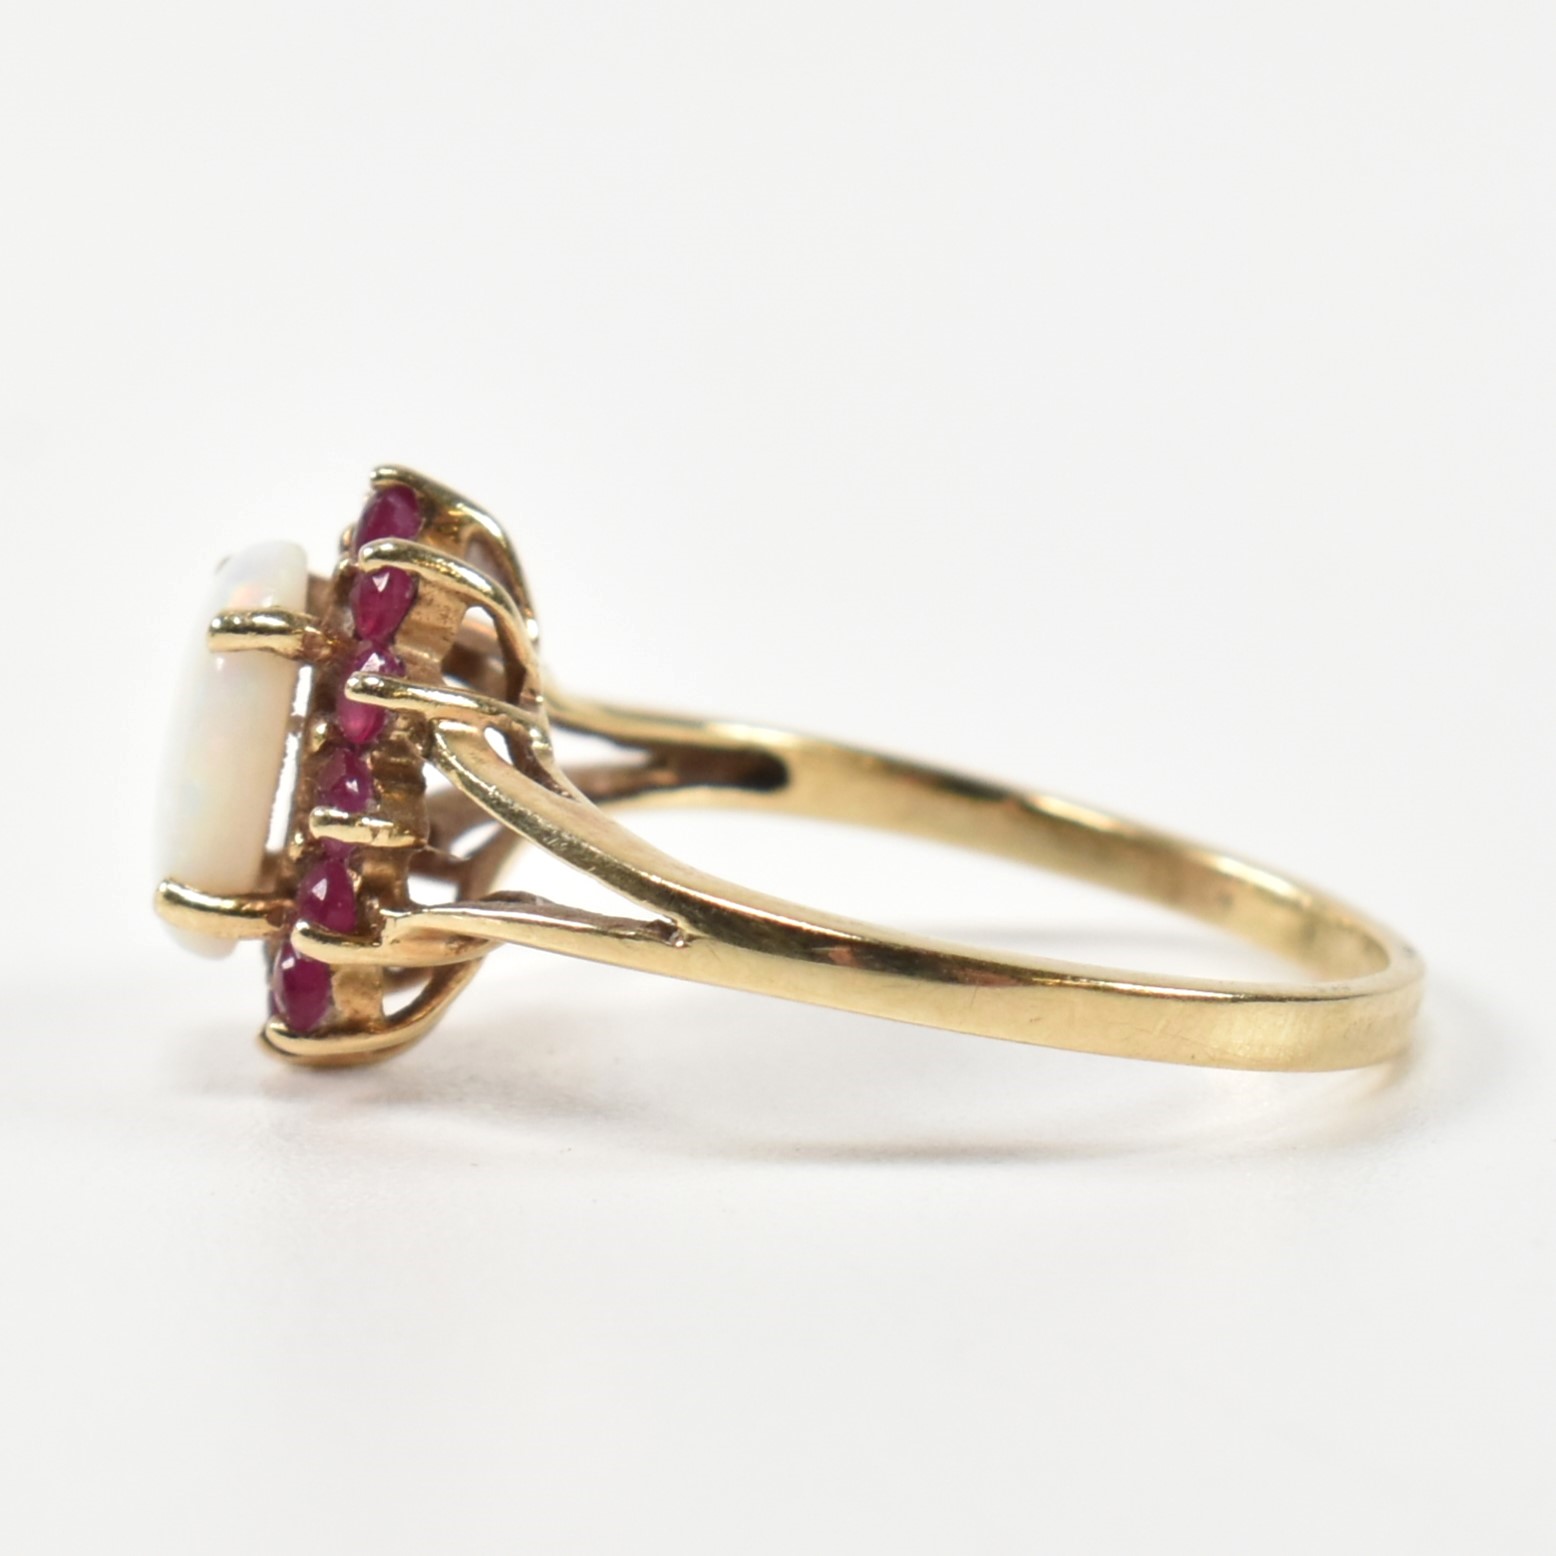 HALLMARKED 9CT GOLD OPAL & RUBY CLUSTER RING - Image 2 of 8